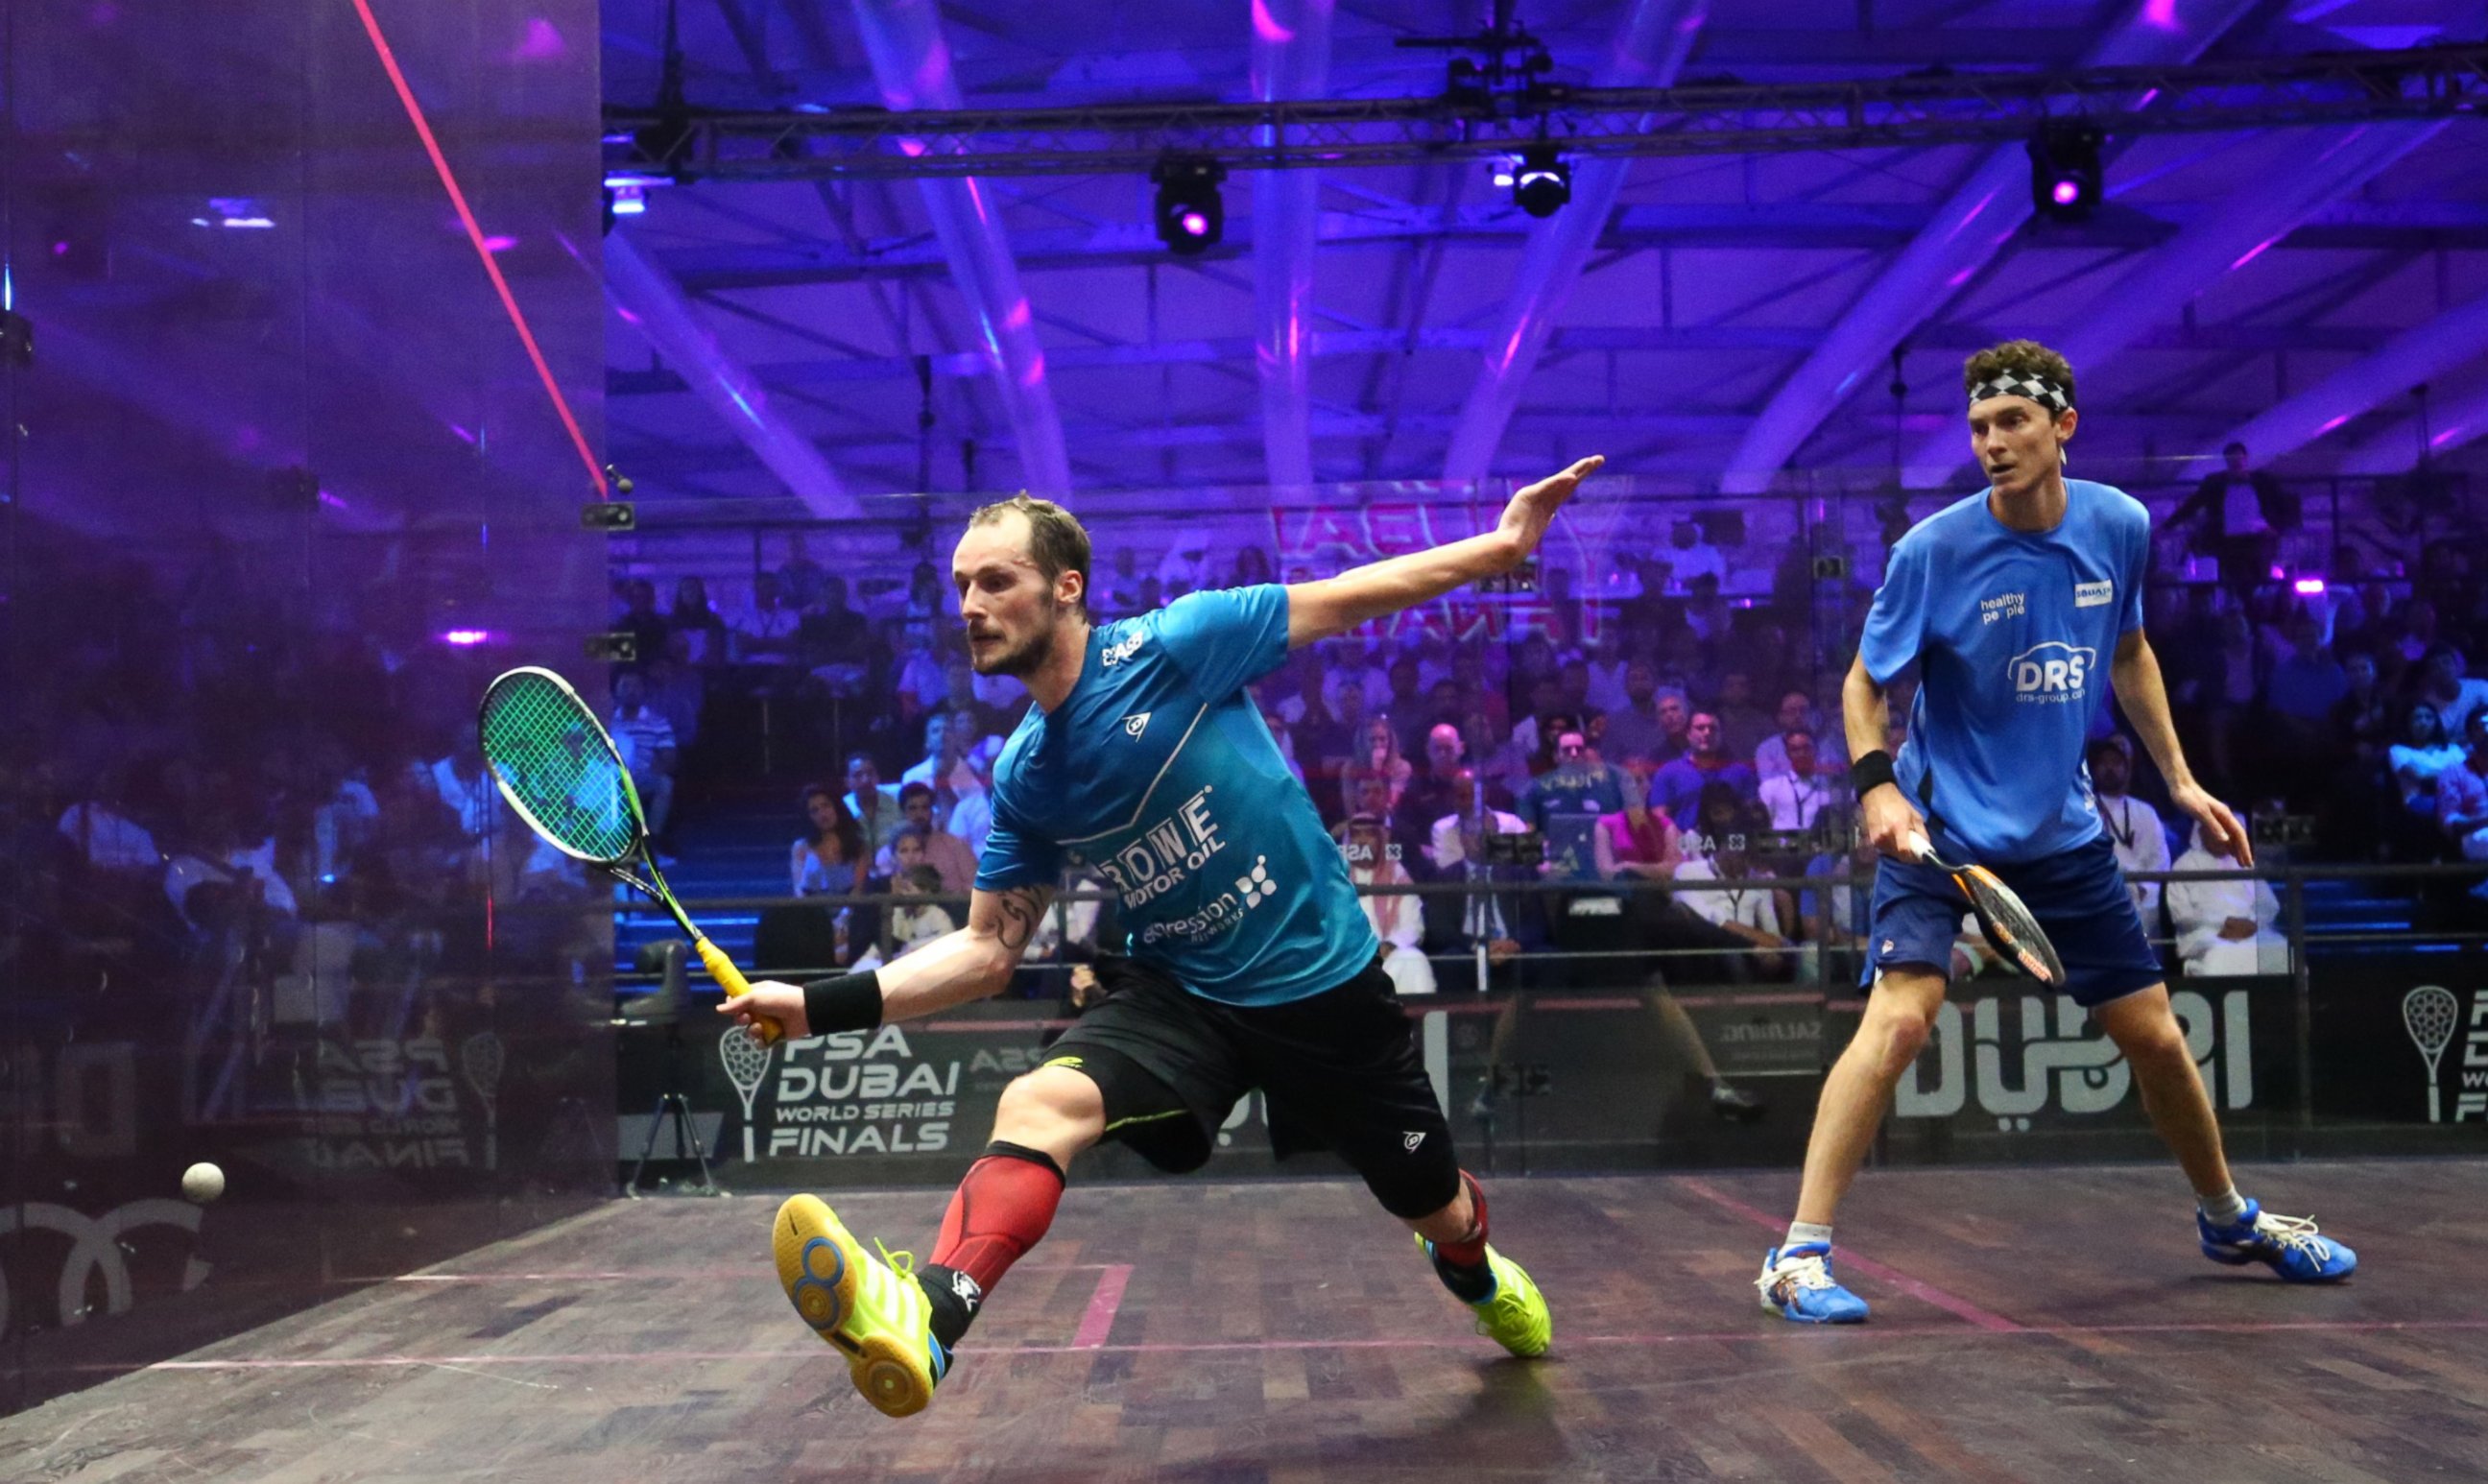 PHOTO: Gregory Gaultier of France plays a forehand to Cameron Pilley of Australia in the men's final match of the Dubai PSA World Series Finals squash tournament in Dubai on May 28, 2016.